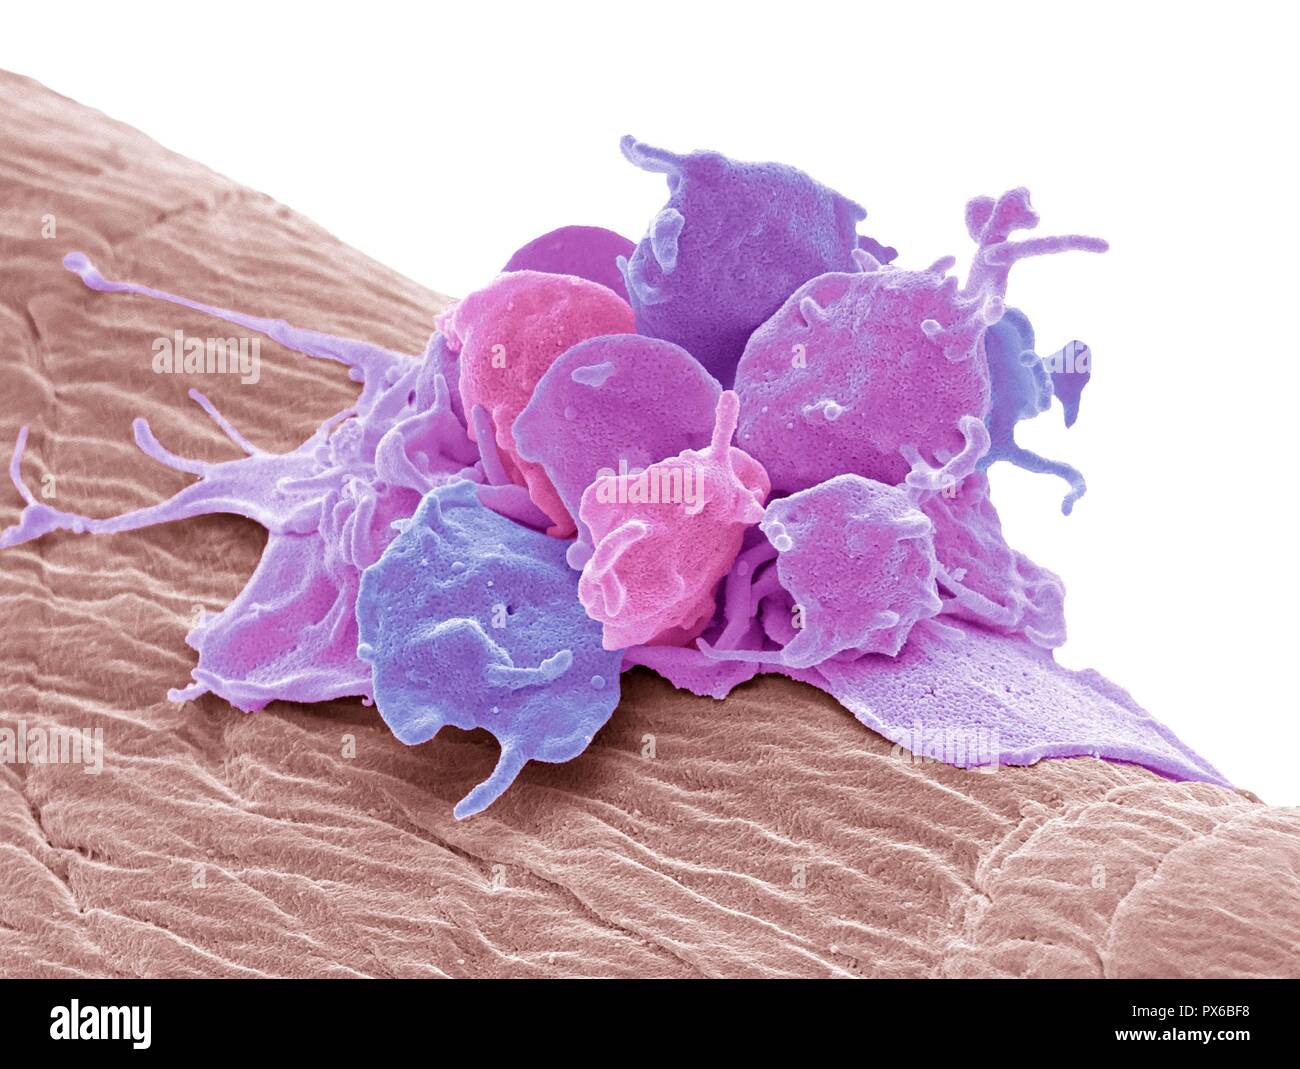 Activated platelets. Coloured scanning electron micrograph (SEM) of activated platelets attached to surgical gauze. Platelets are tiny blood cells tha Stock Photo